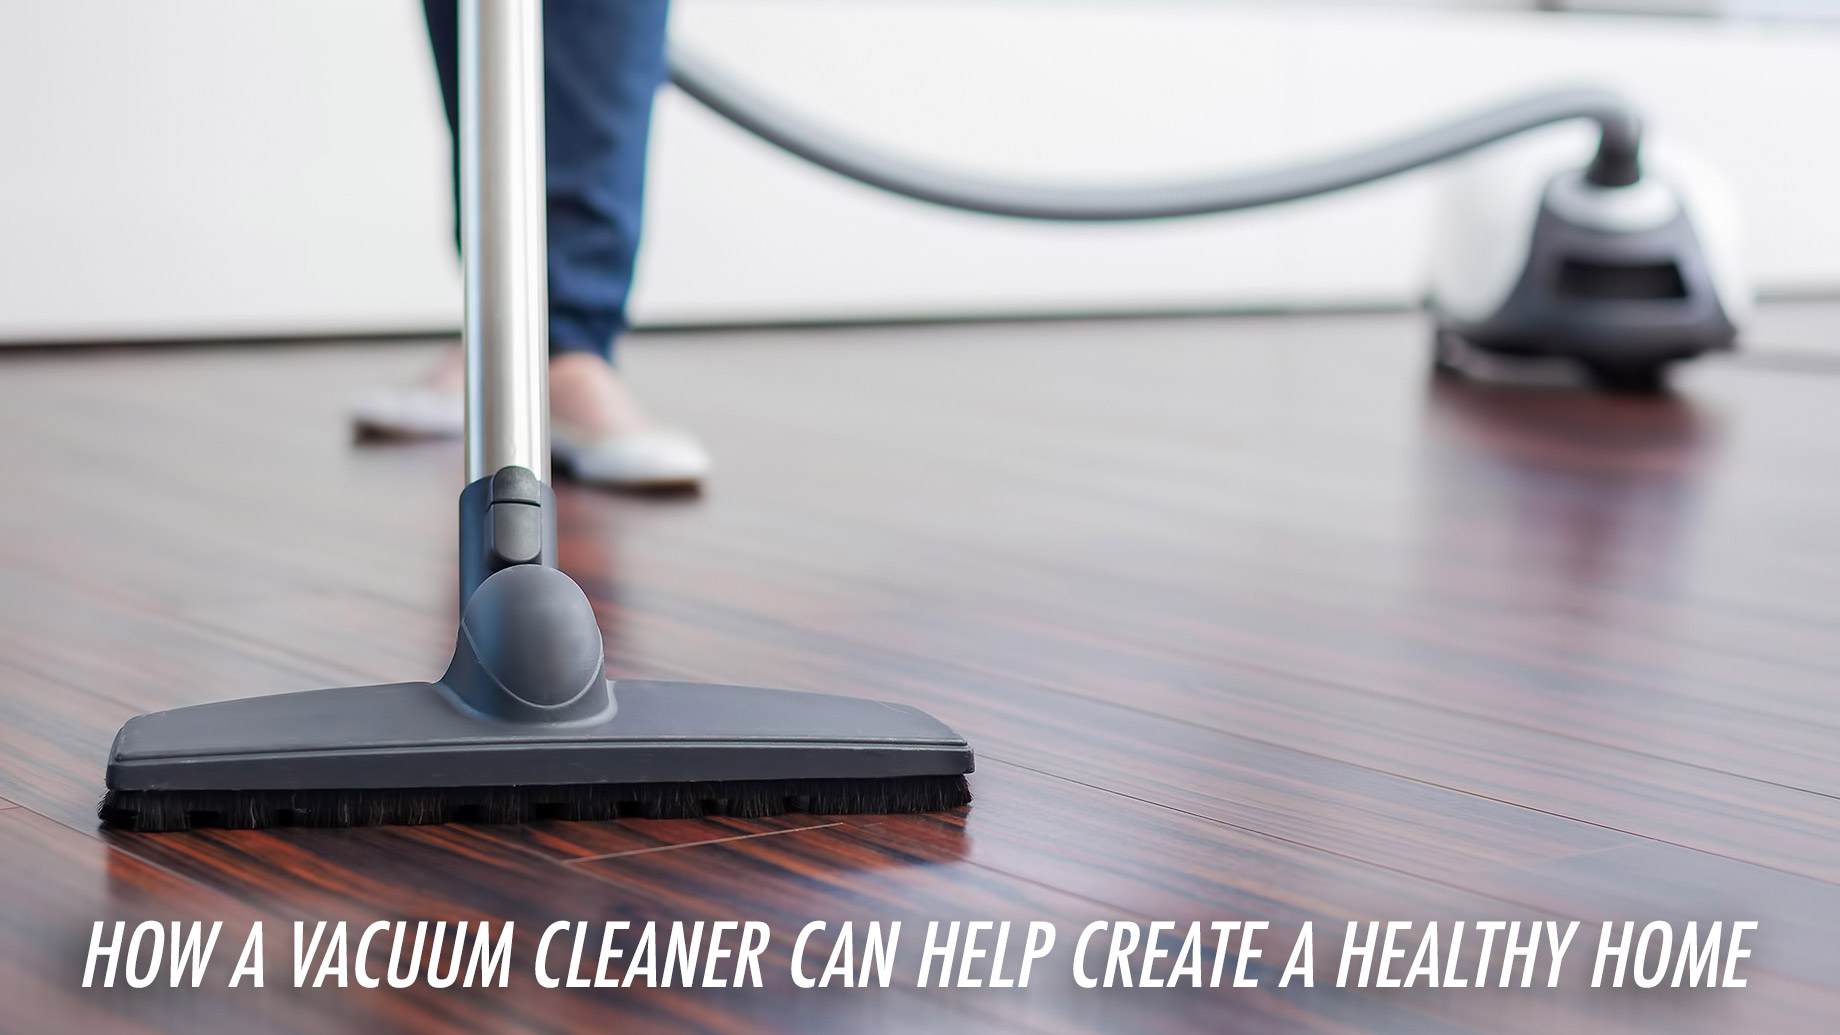 Homeowner Advice - How a Vacuum Cleaner Can Help Create a Healthy Home